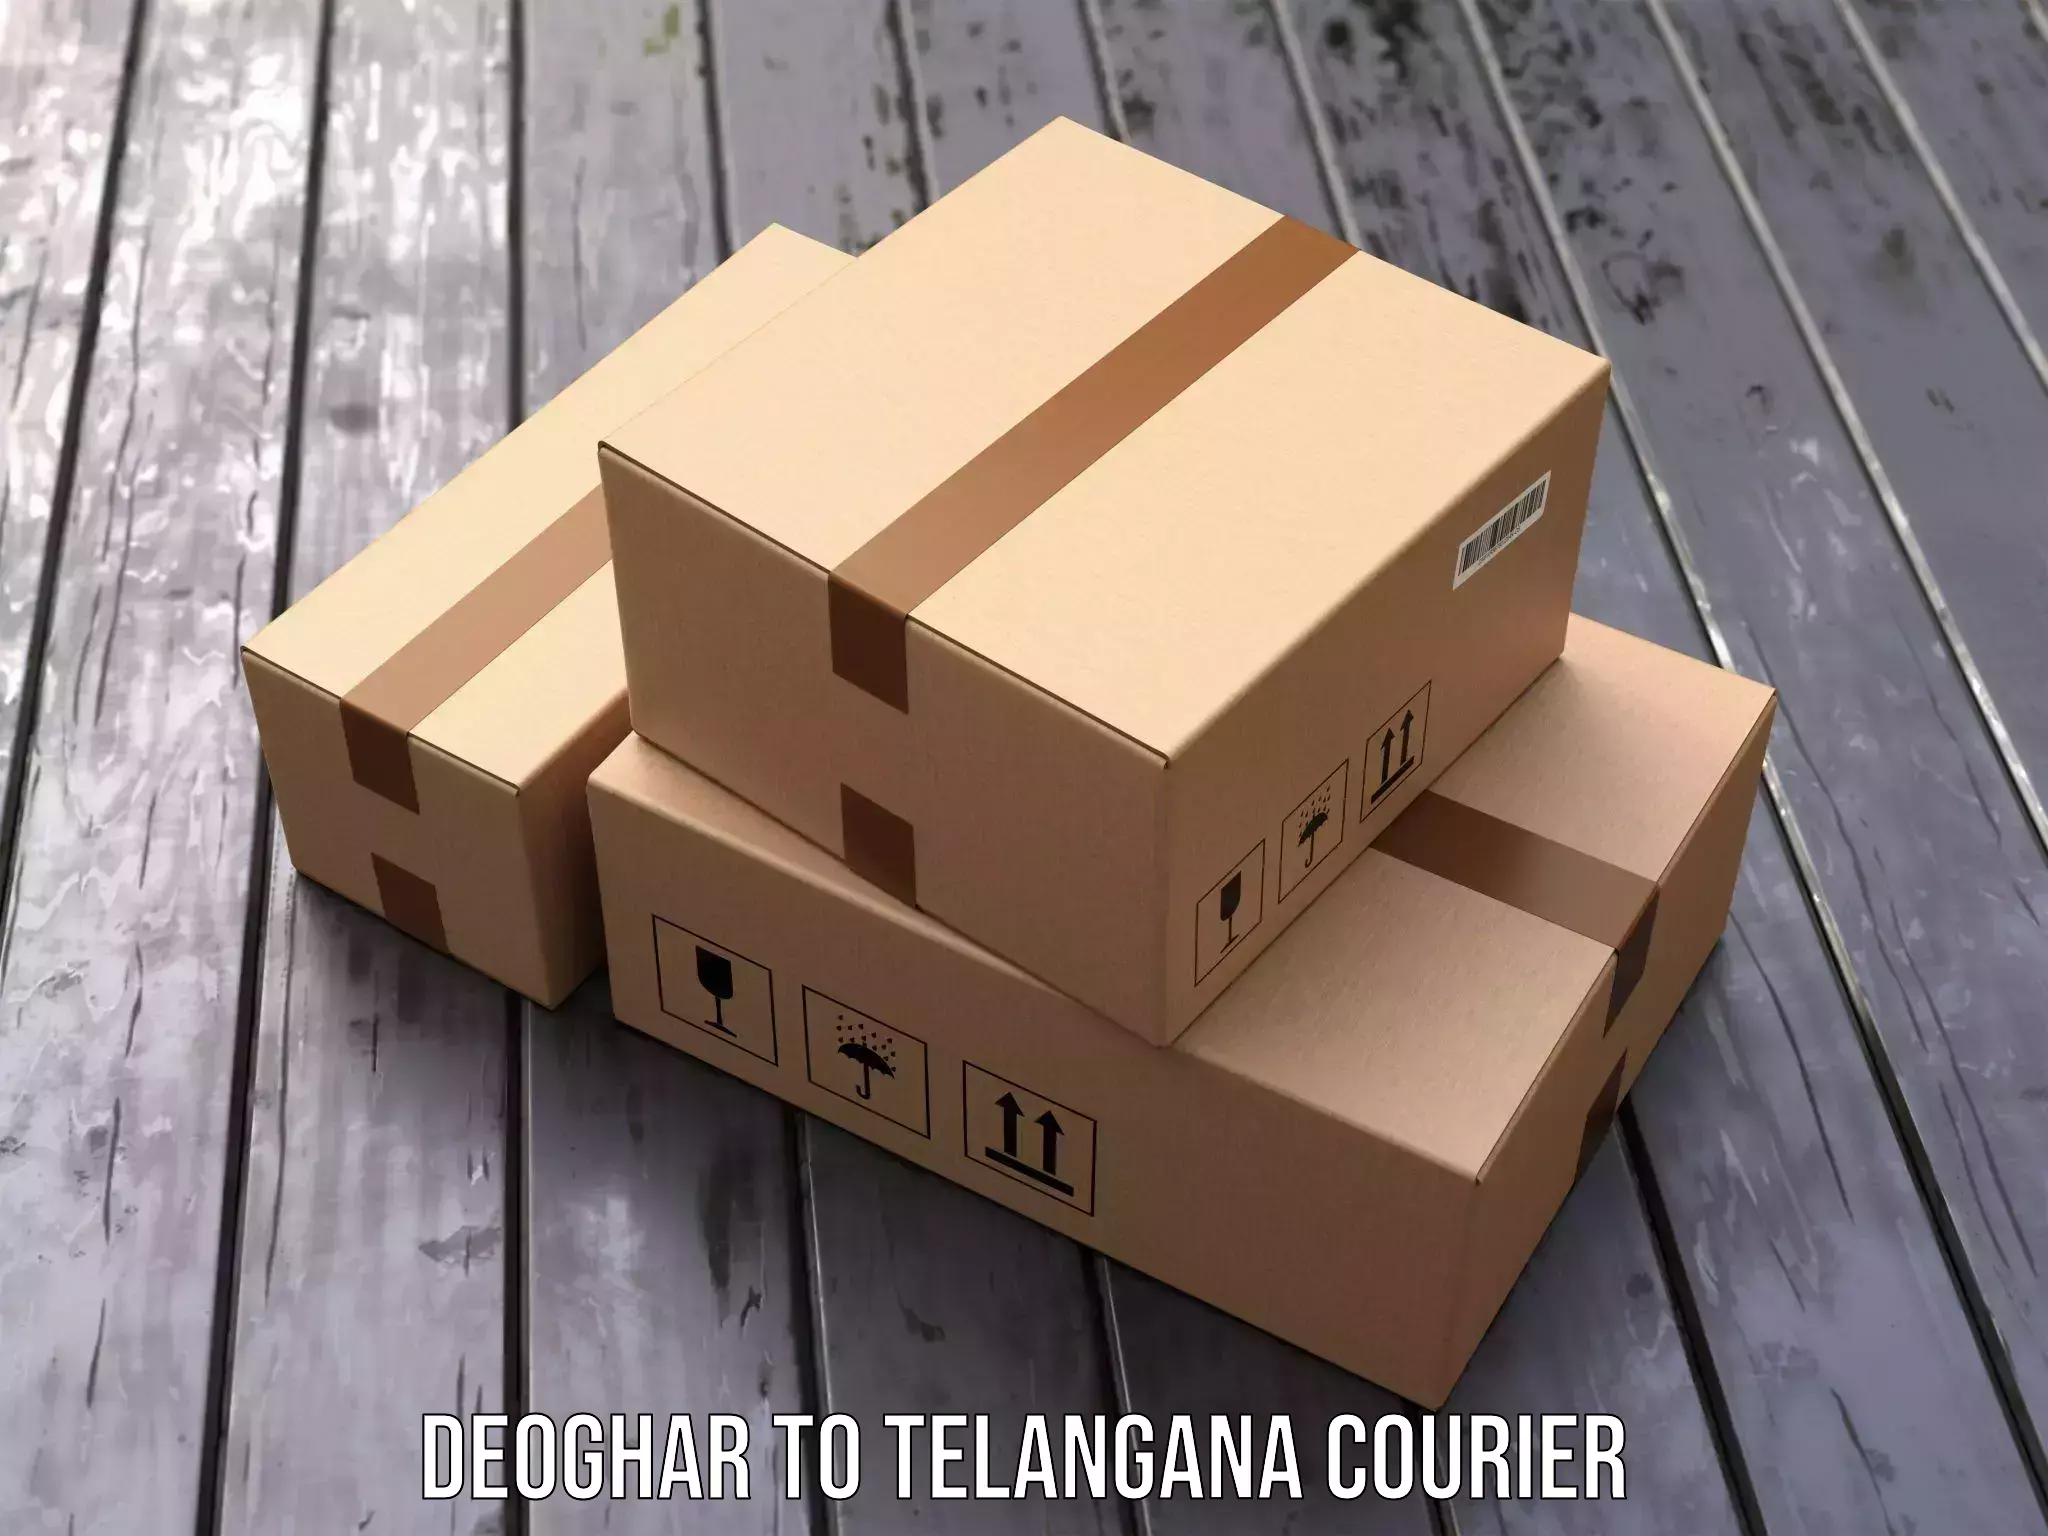 Nationwide shipping coverage Deoghar to Sultanabad